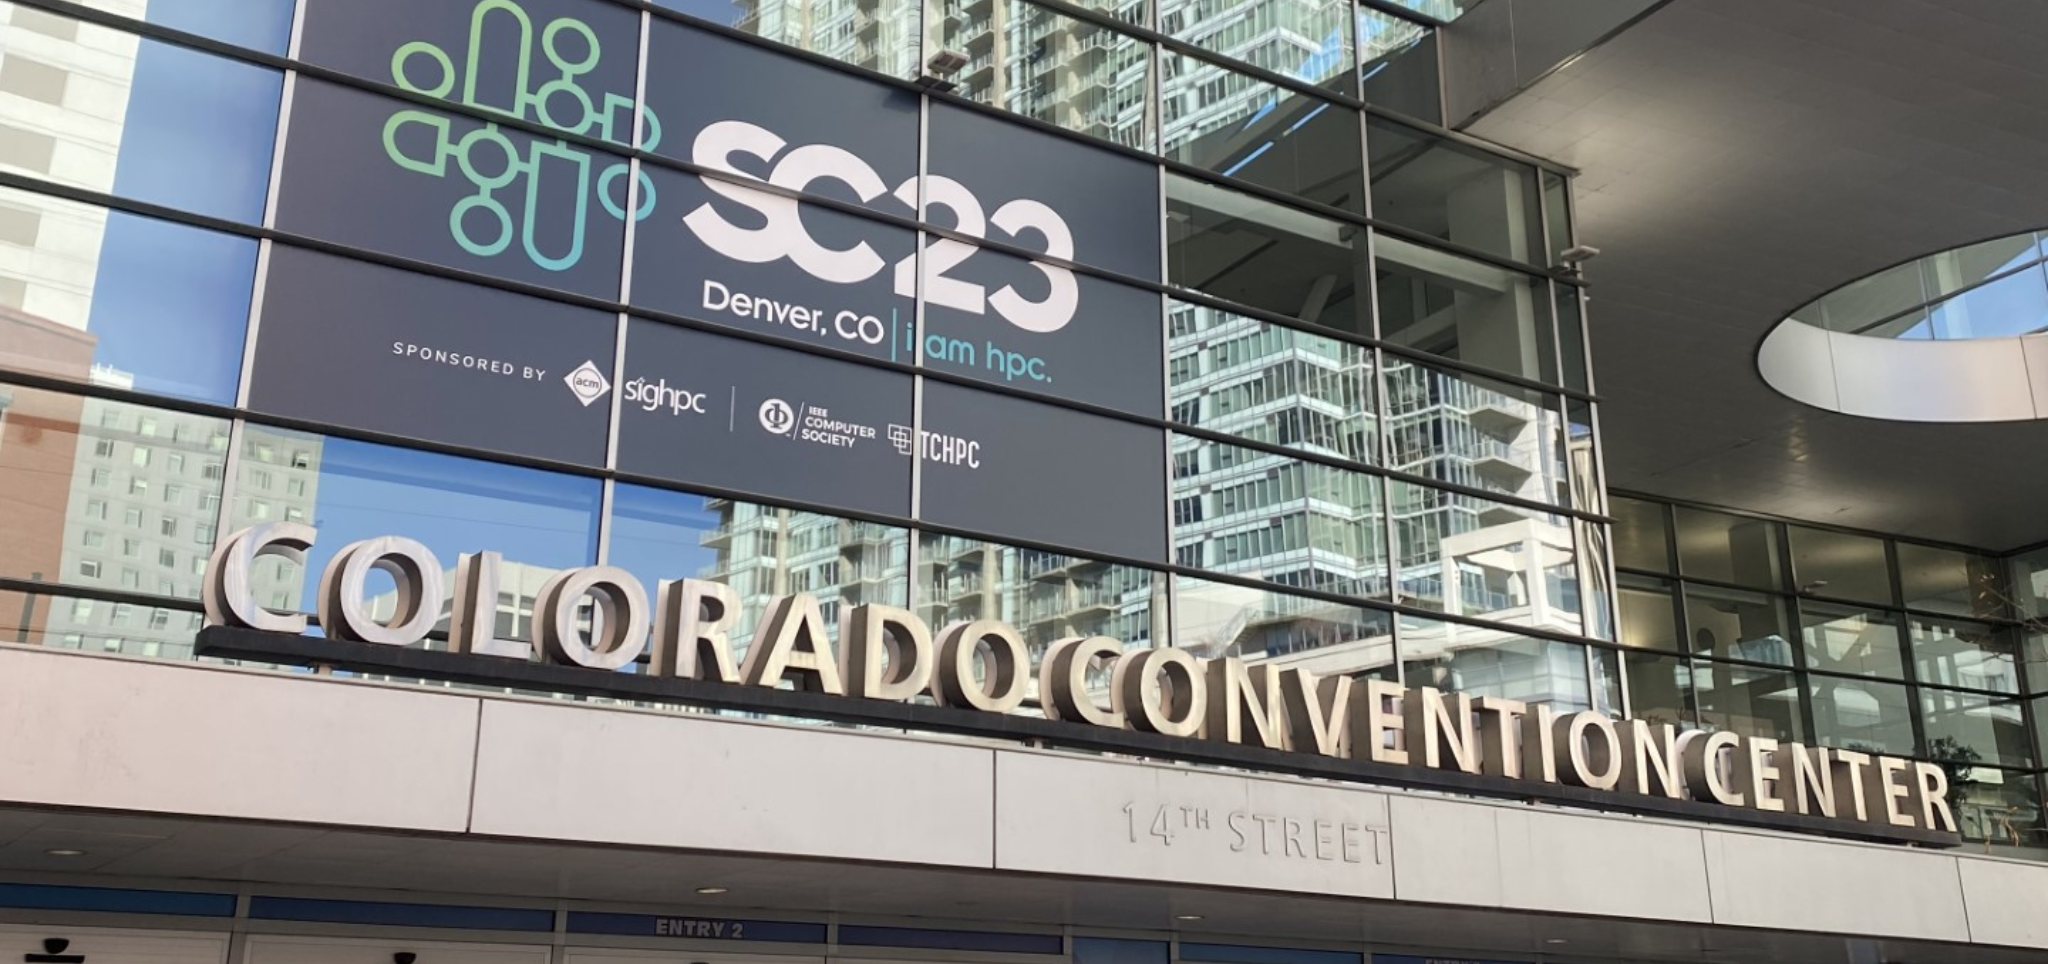 CARC team travels to Denver for supercomputing conference